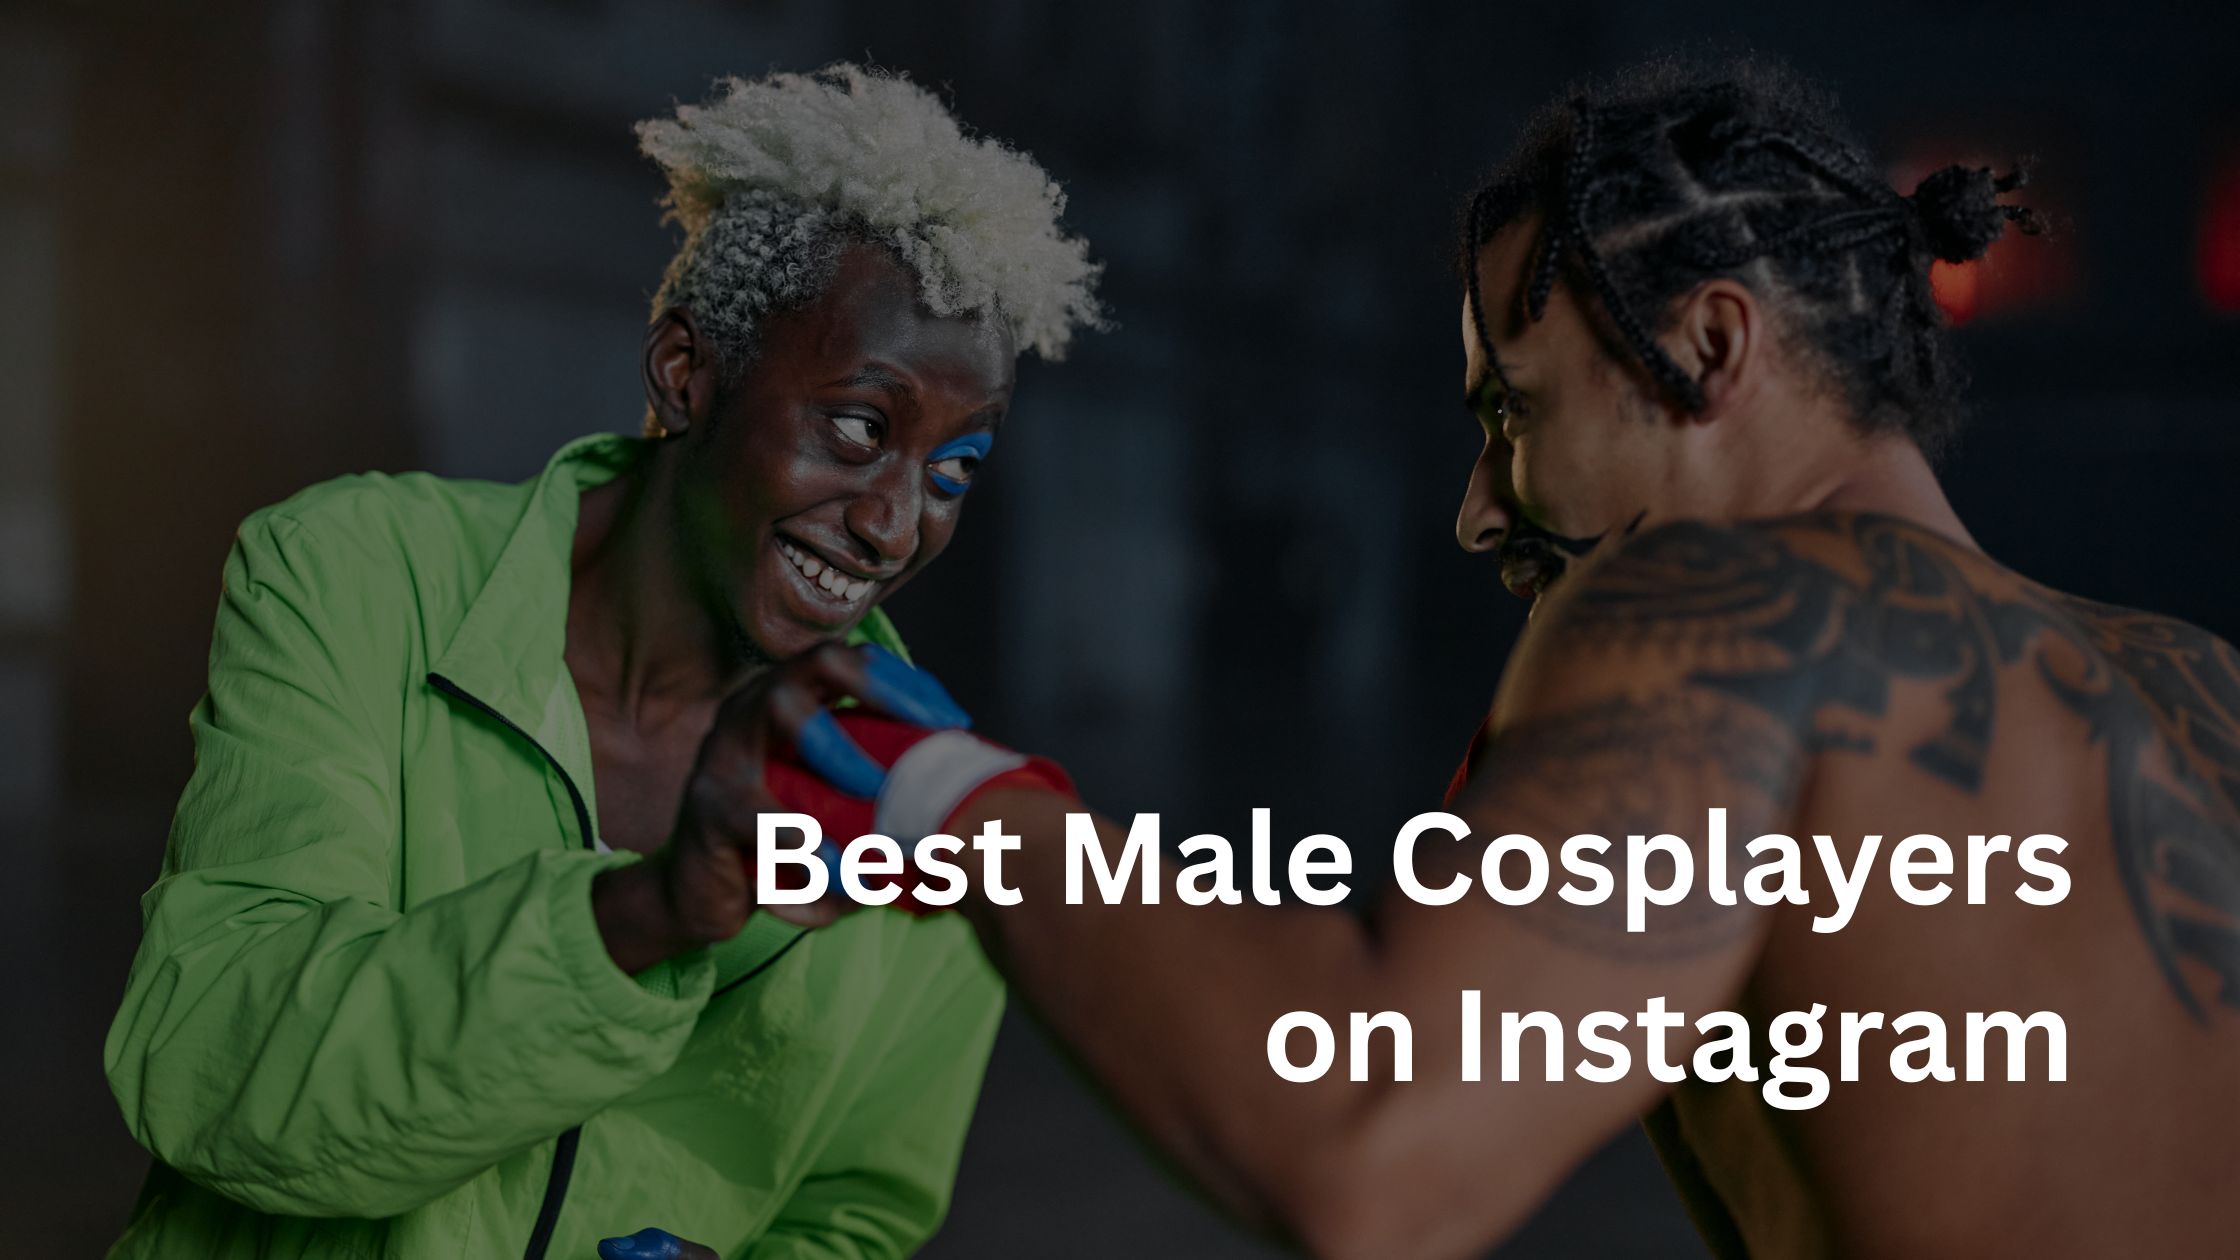 Best Male Cosplayers on Instagram